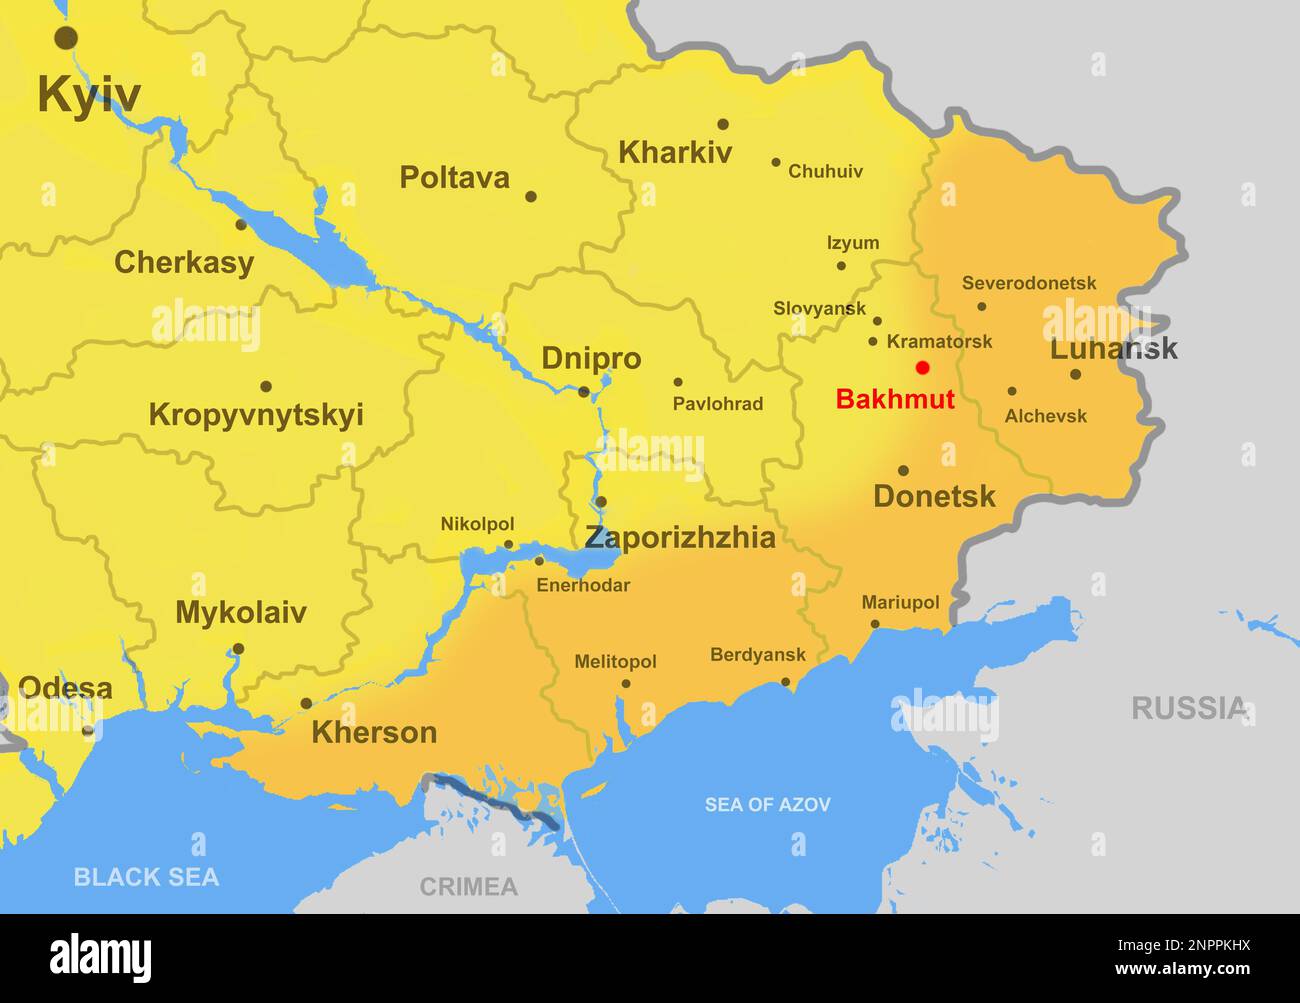 Bakhmut hot spot of war in map of Southeast of Ukraine, territory conquered by Russia. Luhansk, Donetsk, Kherson and Zaporizhzhia regions on outline m Stock Photo